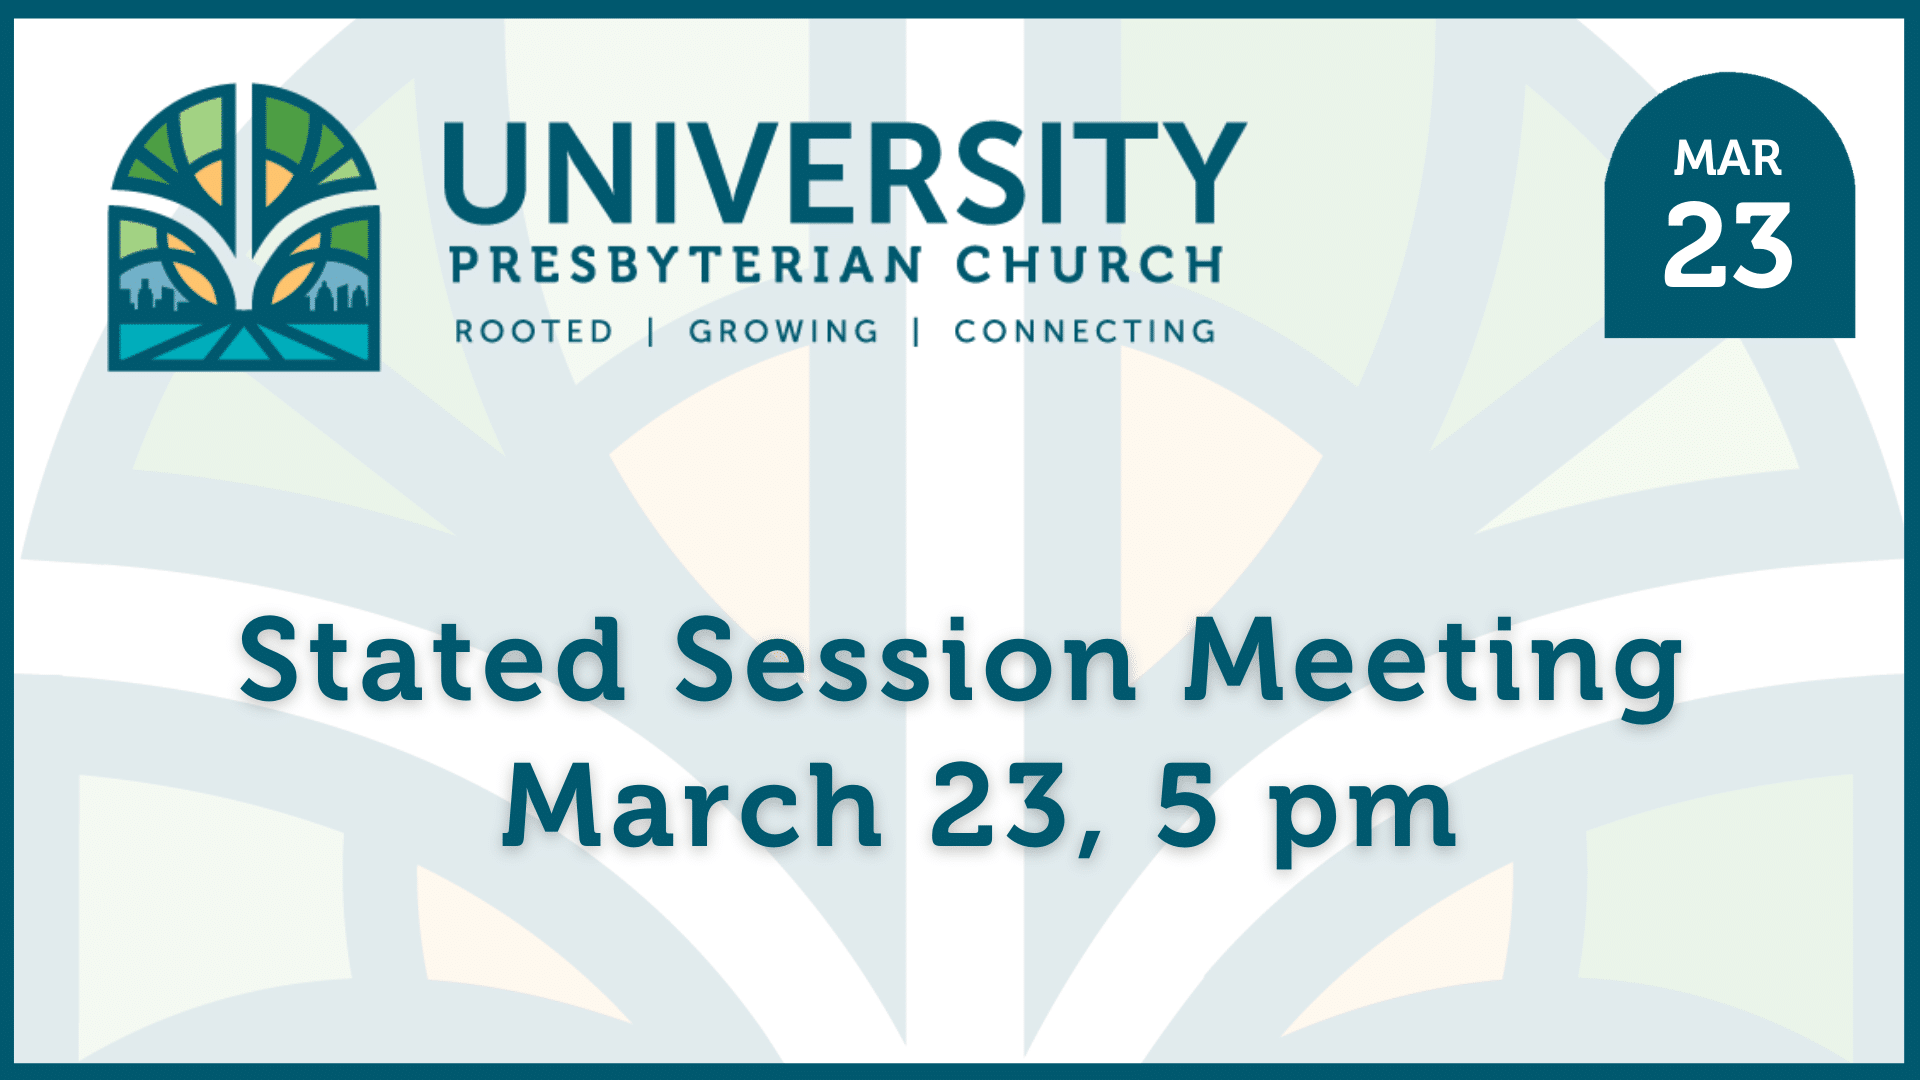 Stated Session Meeting - University Presbyterian Church